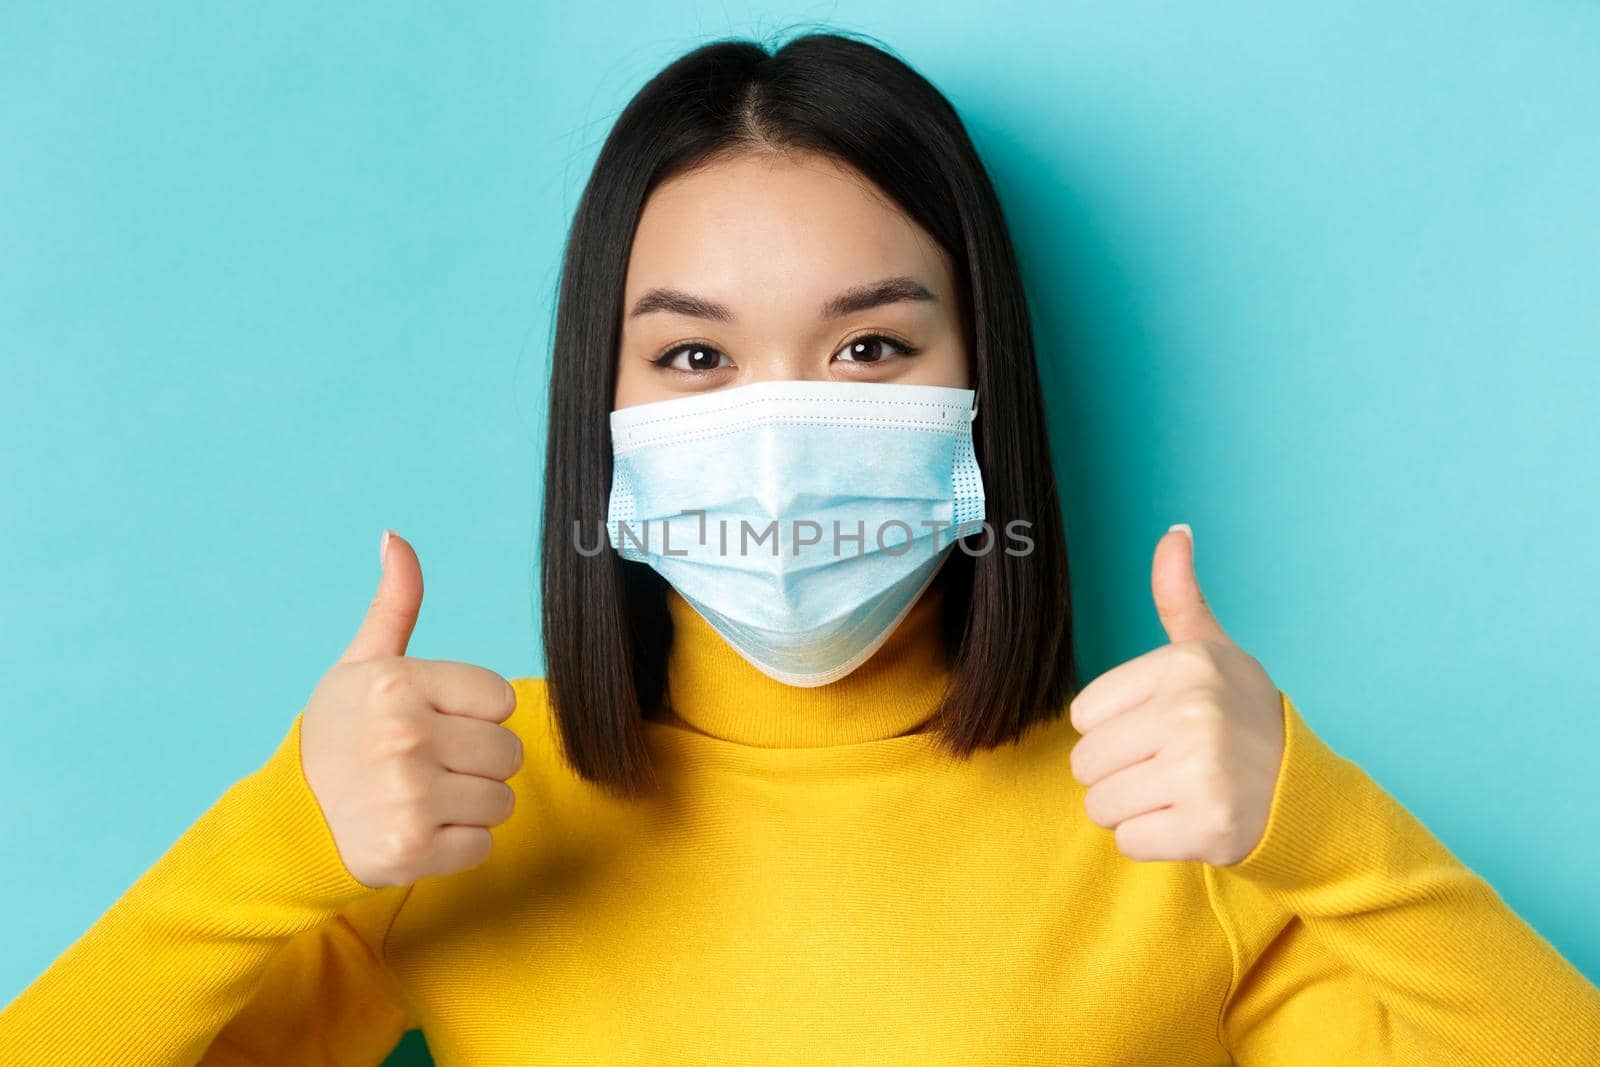 Covid-19, social distancing and pandemic concept. Close up of young asian woman in medical mask showing thumbs up, give approval, praise good offer, standing over blue background.